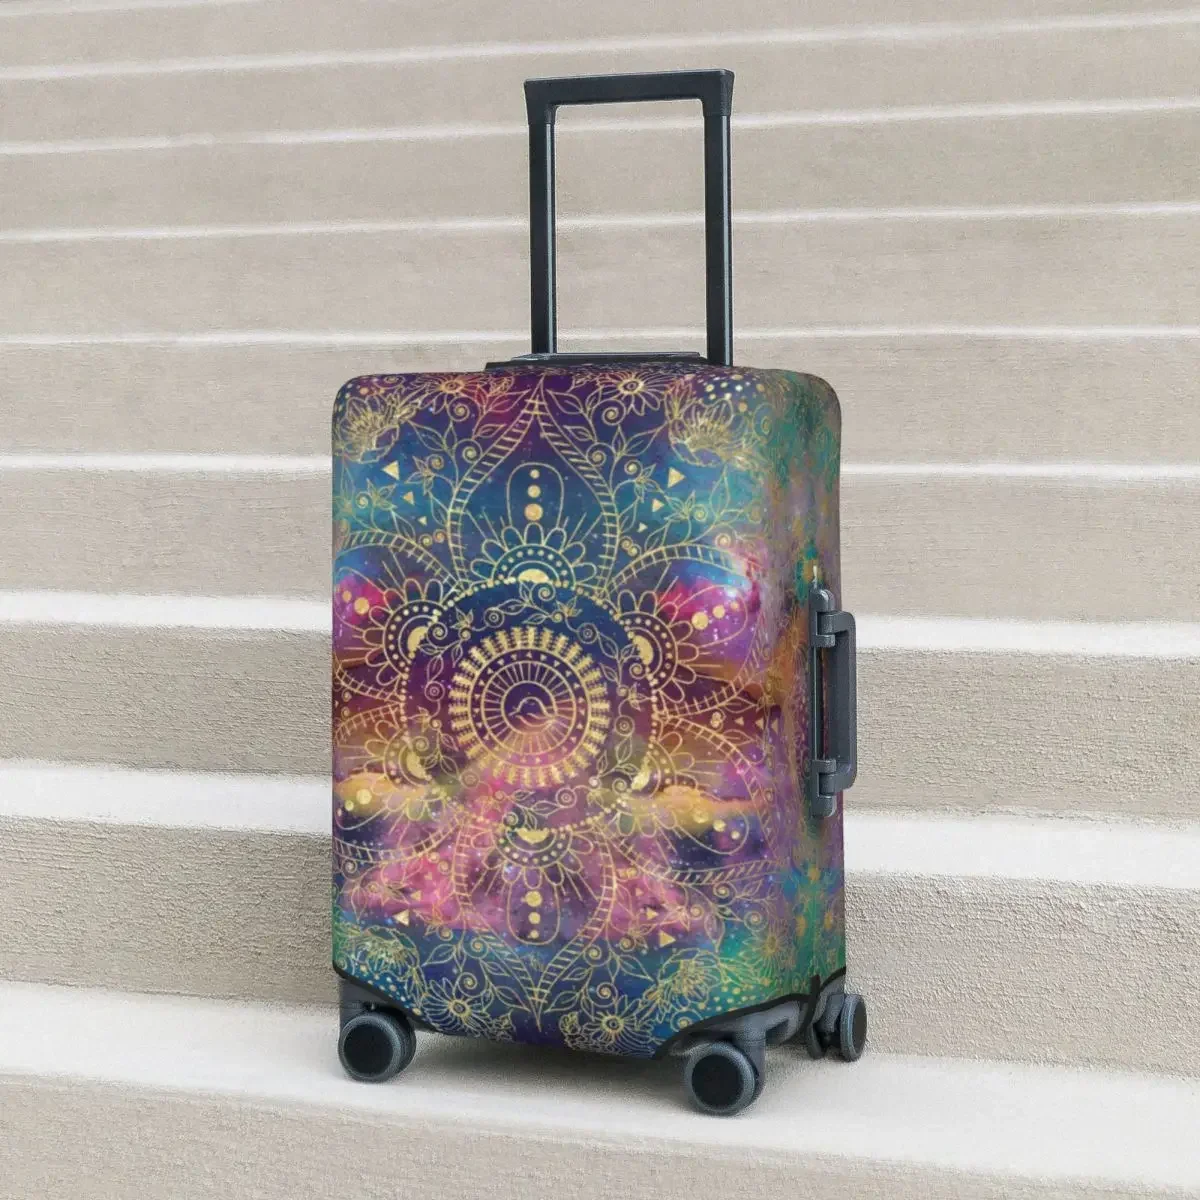 

Tribal Mandala Nebula Flower Suitcase Cover Abstract Space Hand Drawn Travel Protector Vacation Useful Luggage Accesories